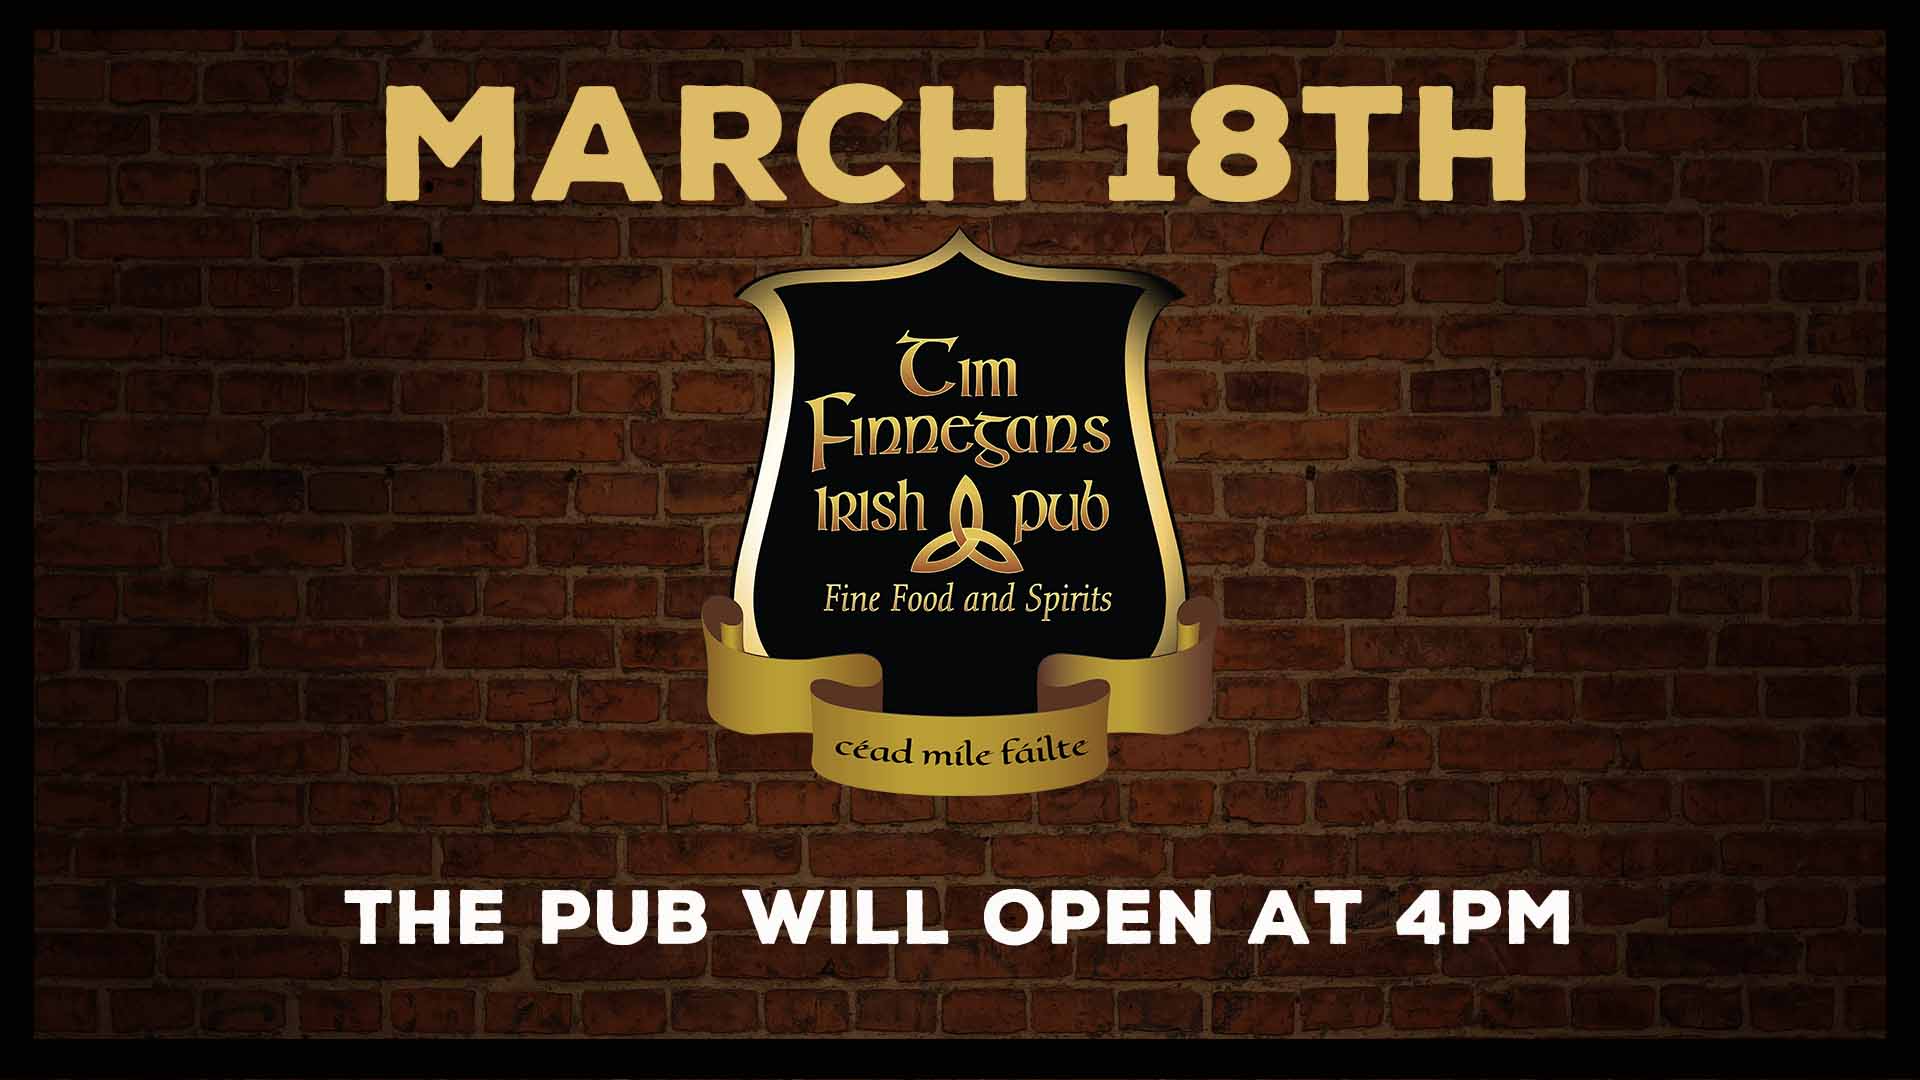 March 18th - the pub will open at 4pm